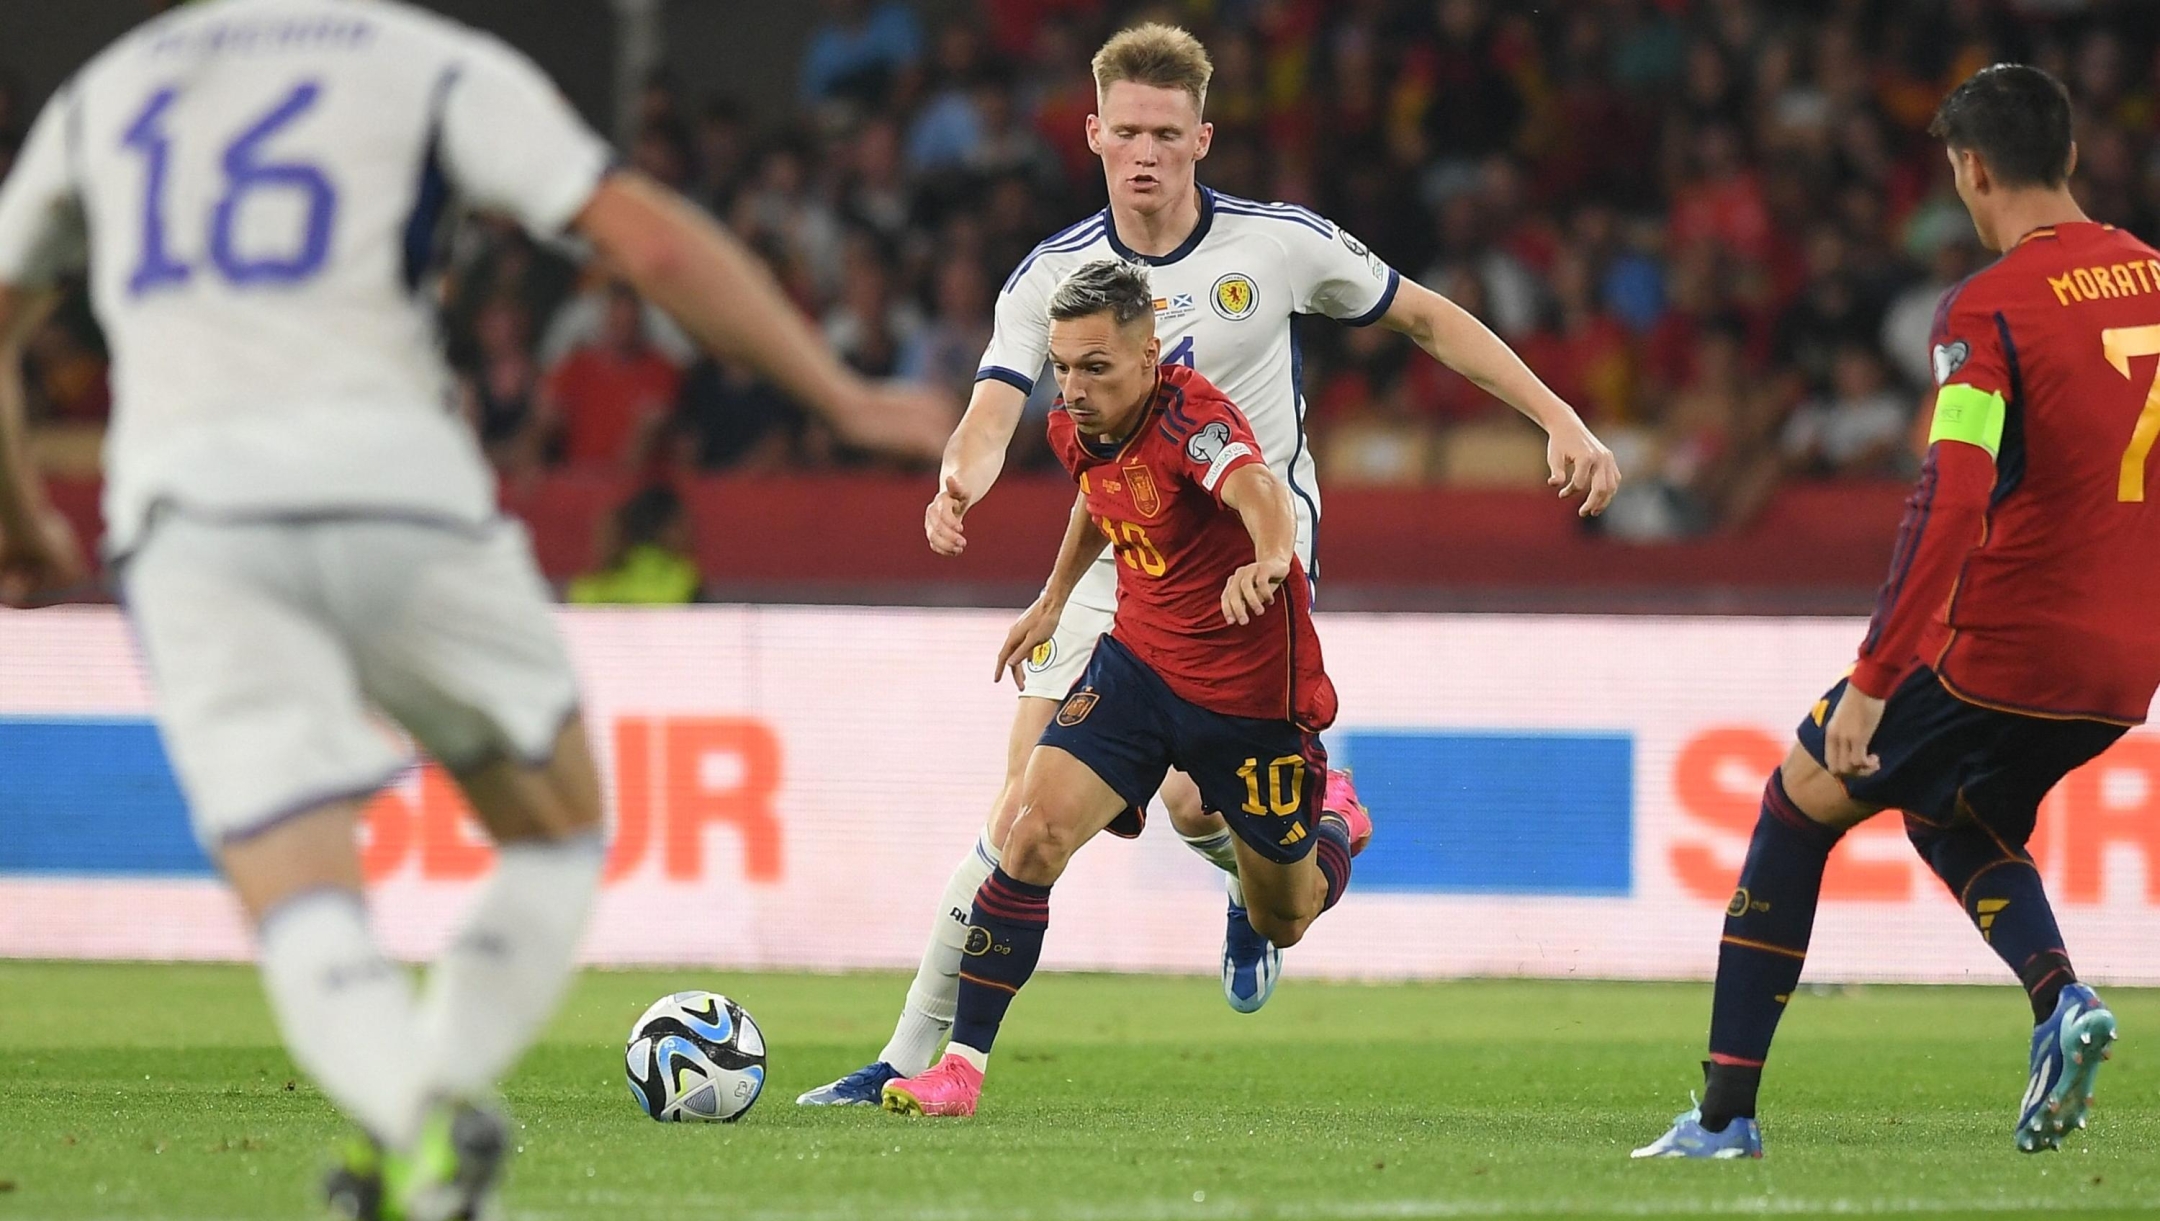 Spain's forward #10 Bryan Zaragoza vies with Scotland's midfielder #04 Scott McTominay during the EURO 2024 first round group A qualifying football match between Spain and Scotland at the La Cartuja stadium in Seville on October 12, 2023. (Photo by JORGE GUERRERO / AFP)